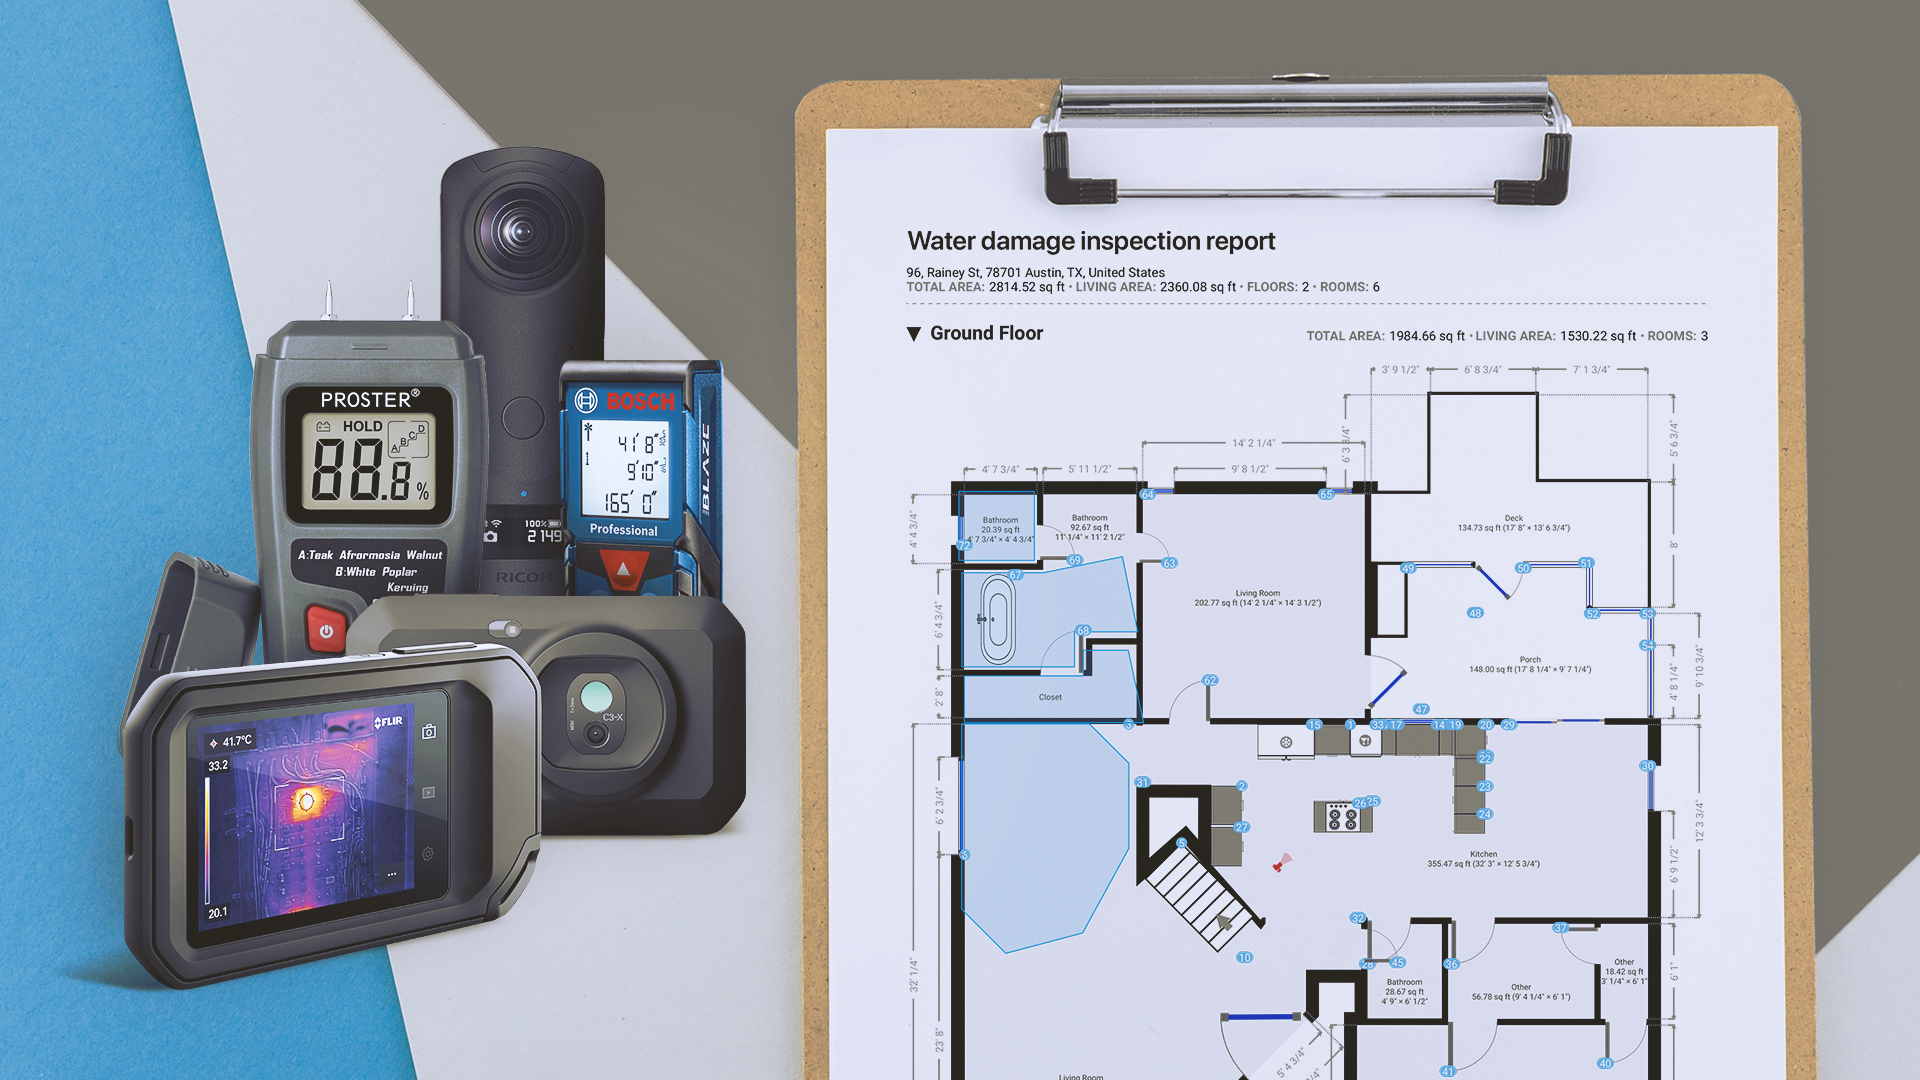 Helpful Tools for Finding and Documenting Water Damage (including a thermal camera, moisture meter, bluetooth laser, 360 camera, floor plan app and more)